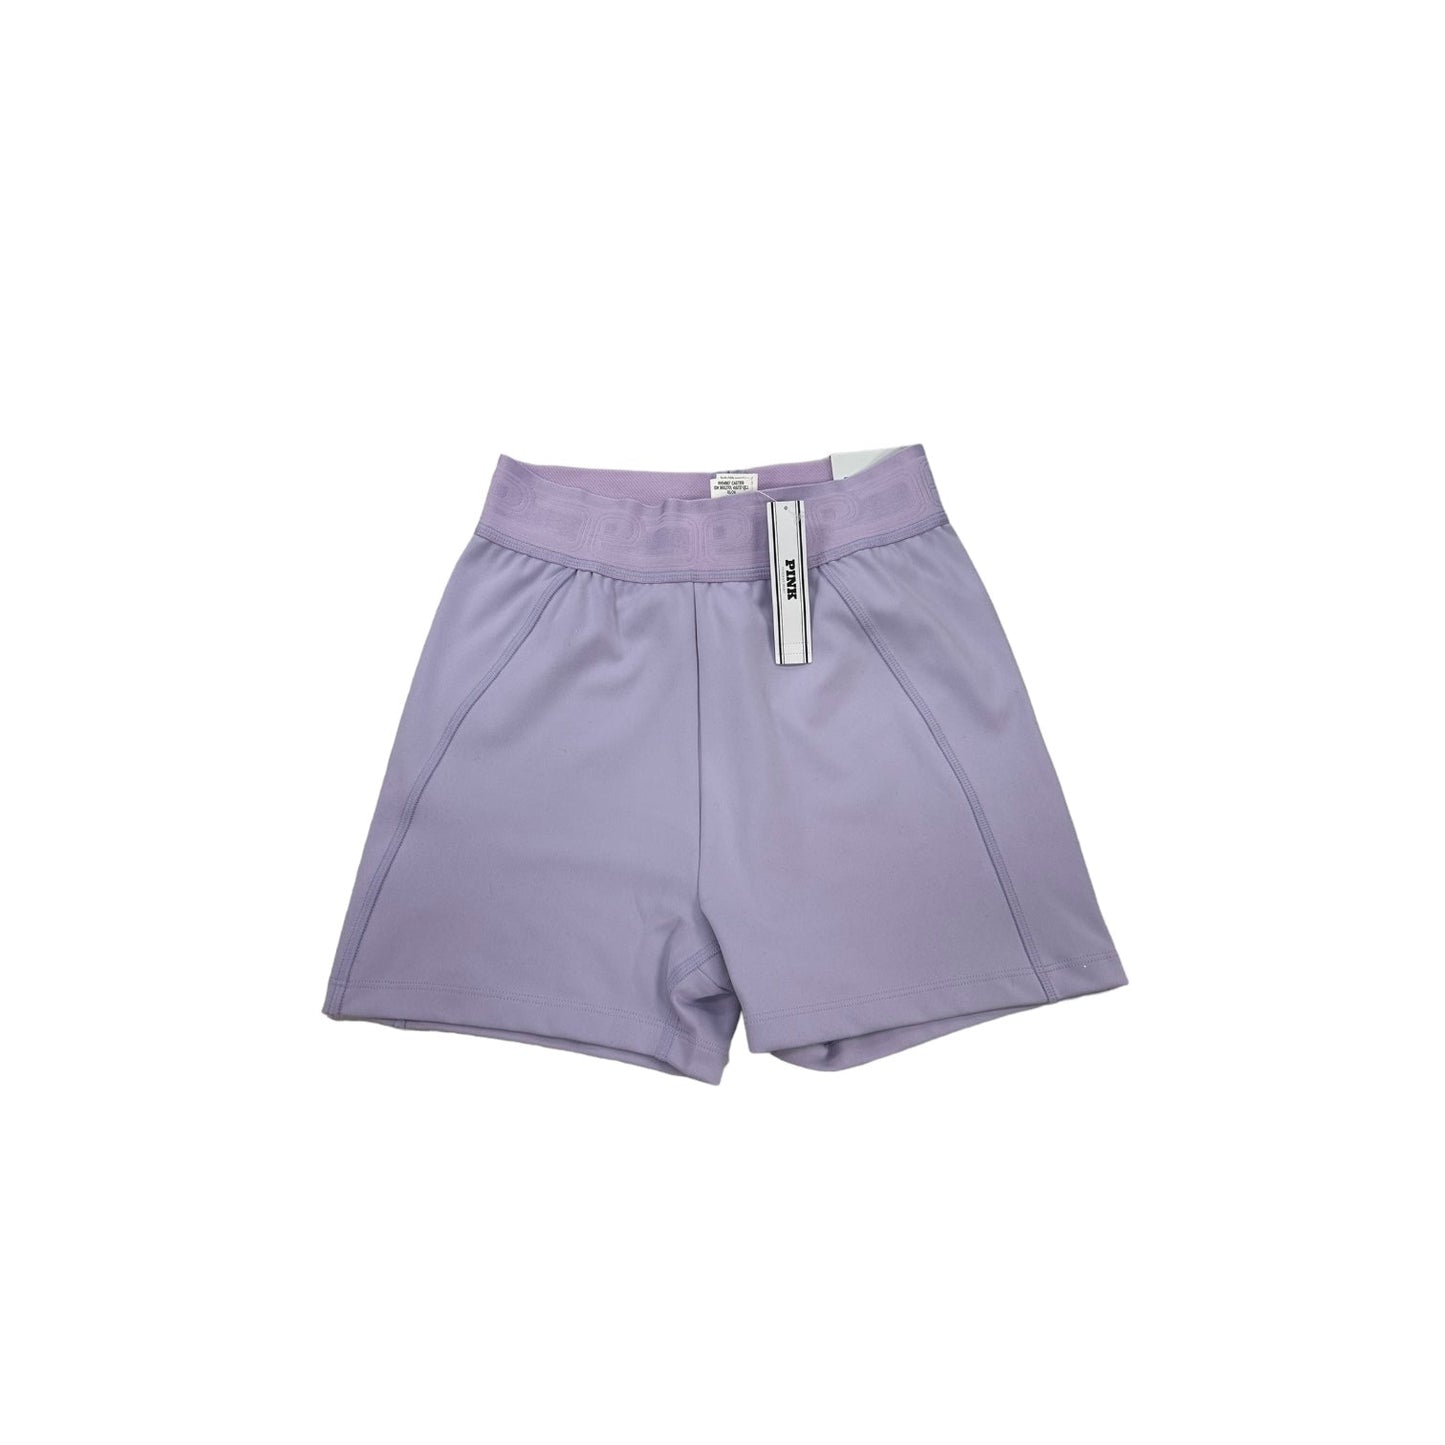 Athletic Shorts By Pink  Size: S